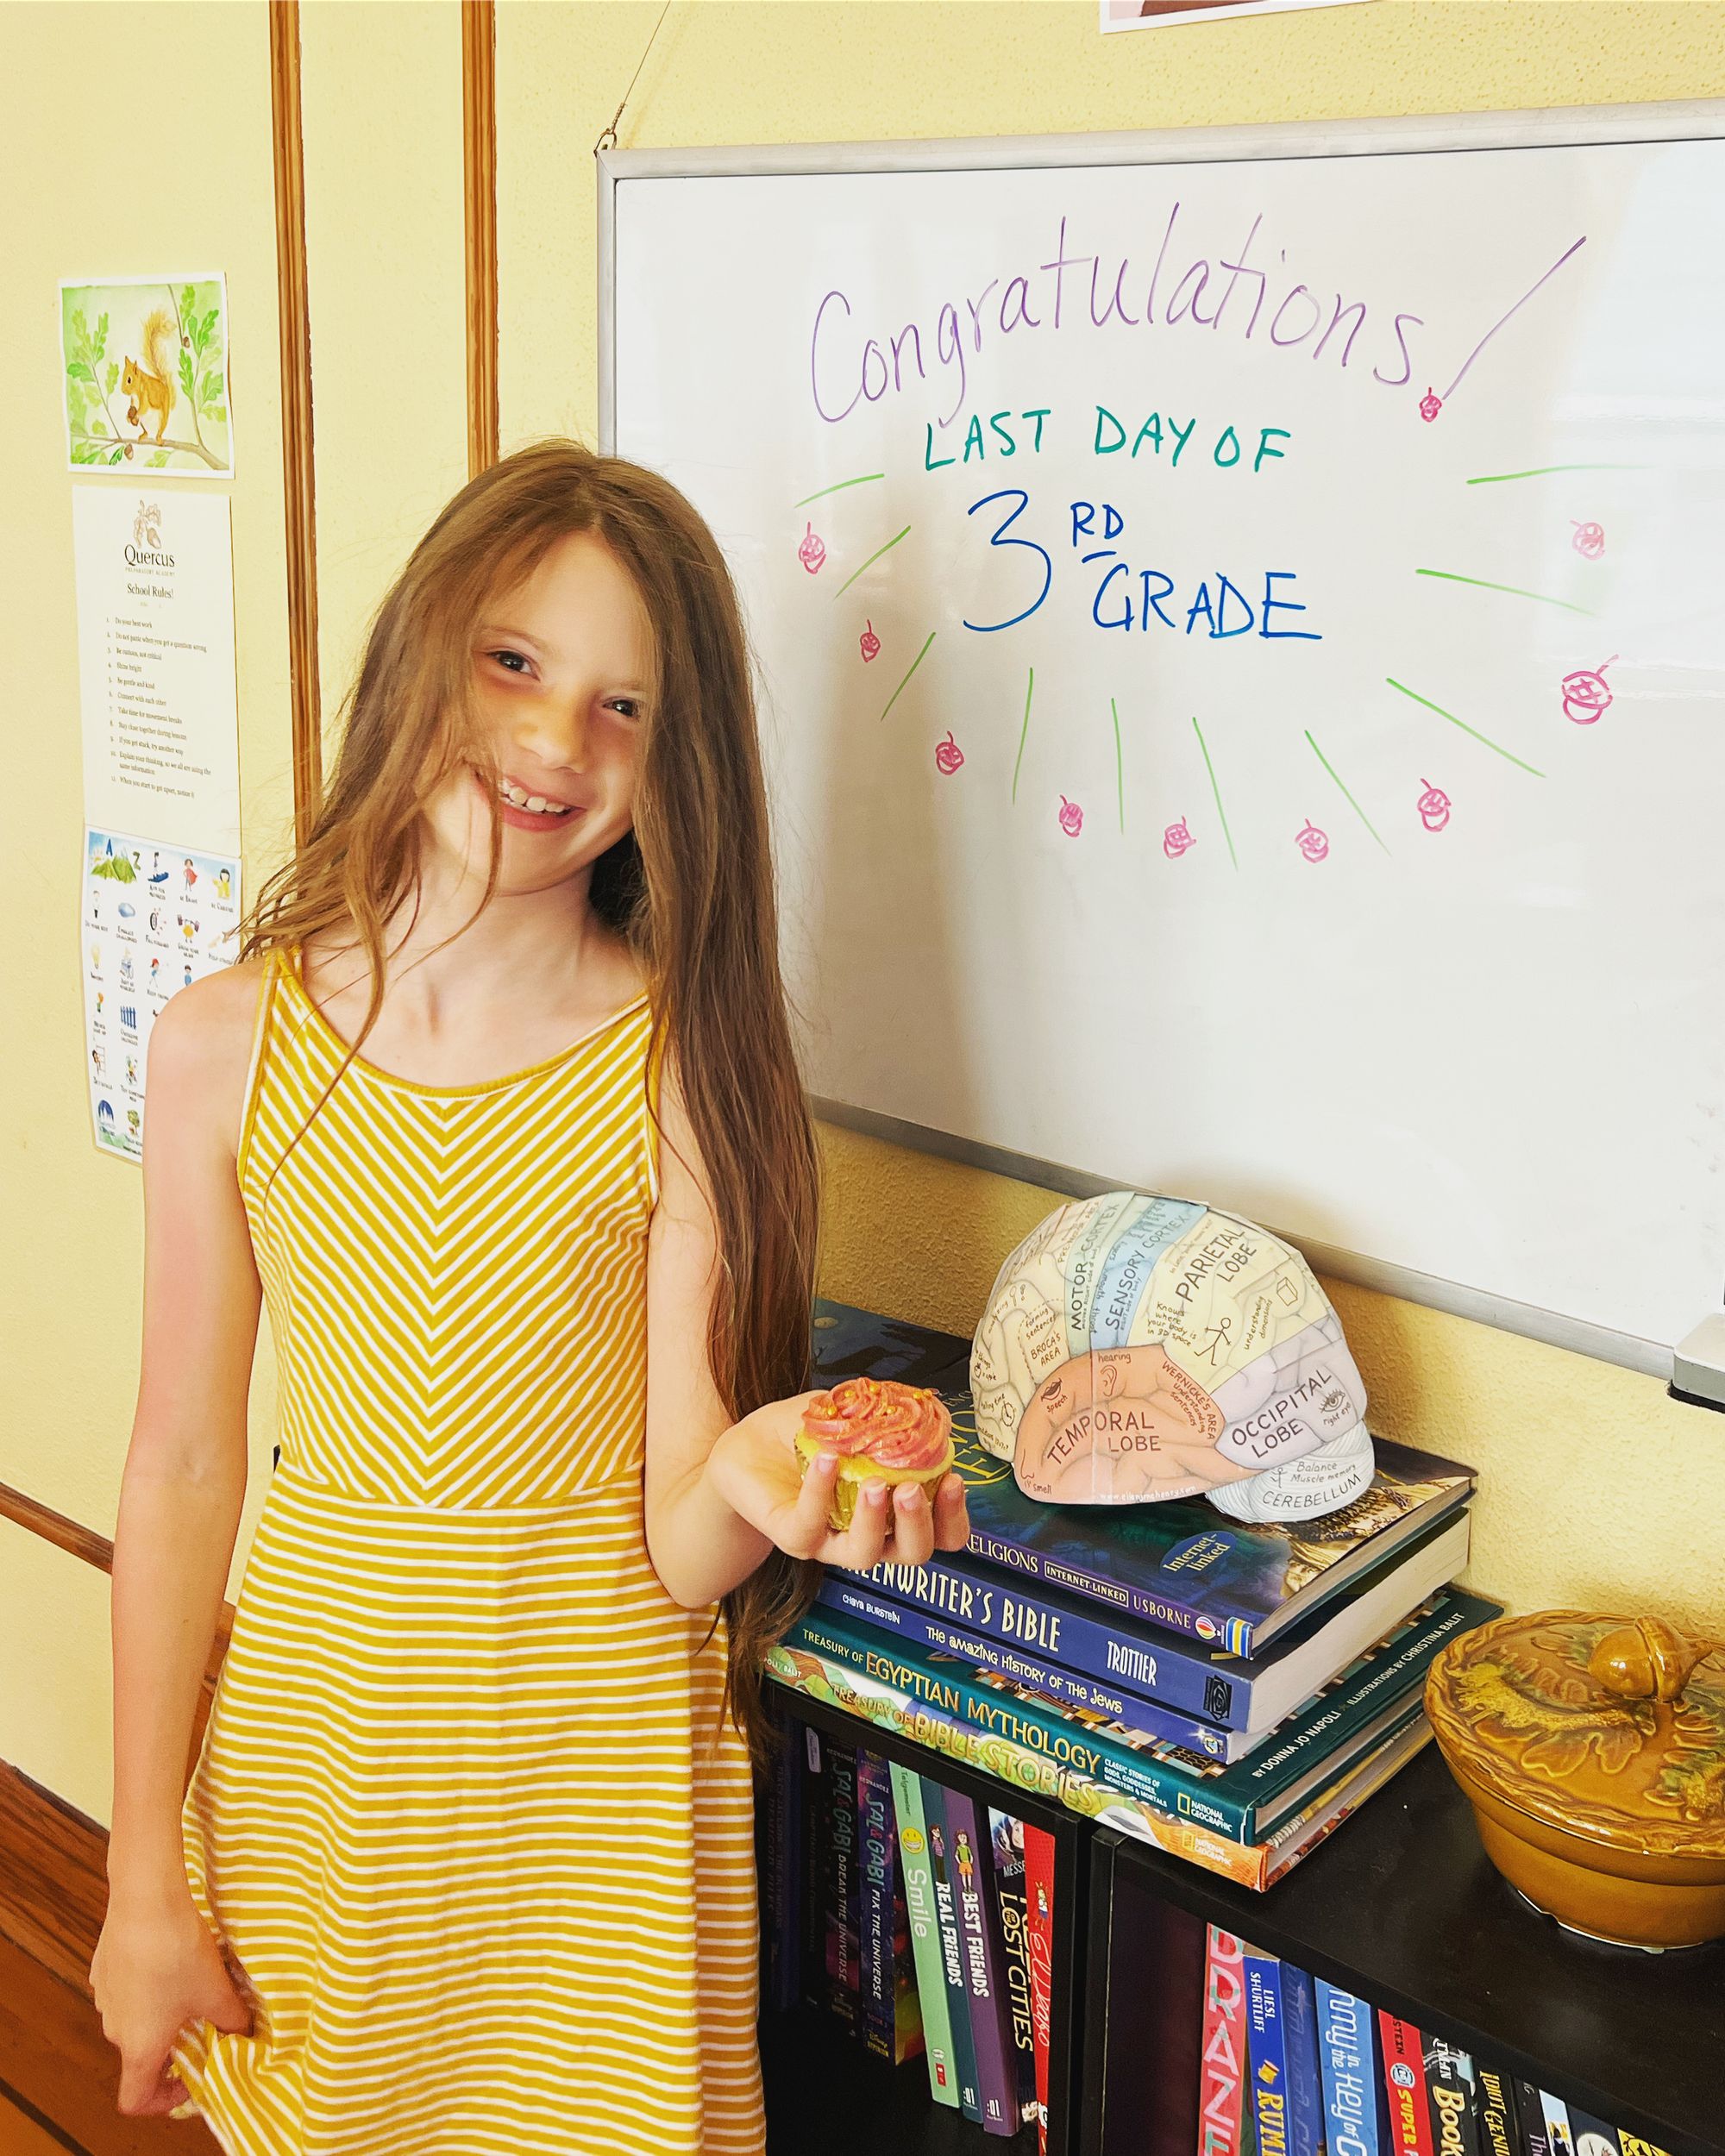 Wanda, wearing a yellow-and-white striped sundress, holding a pink cupcake. The whiteboard says, "Congratulations! Last day of 3rd grade!"